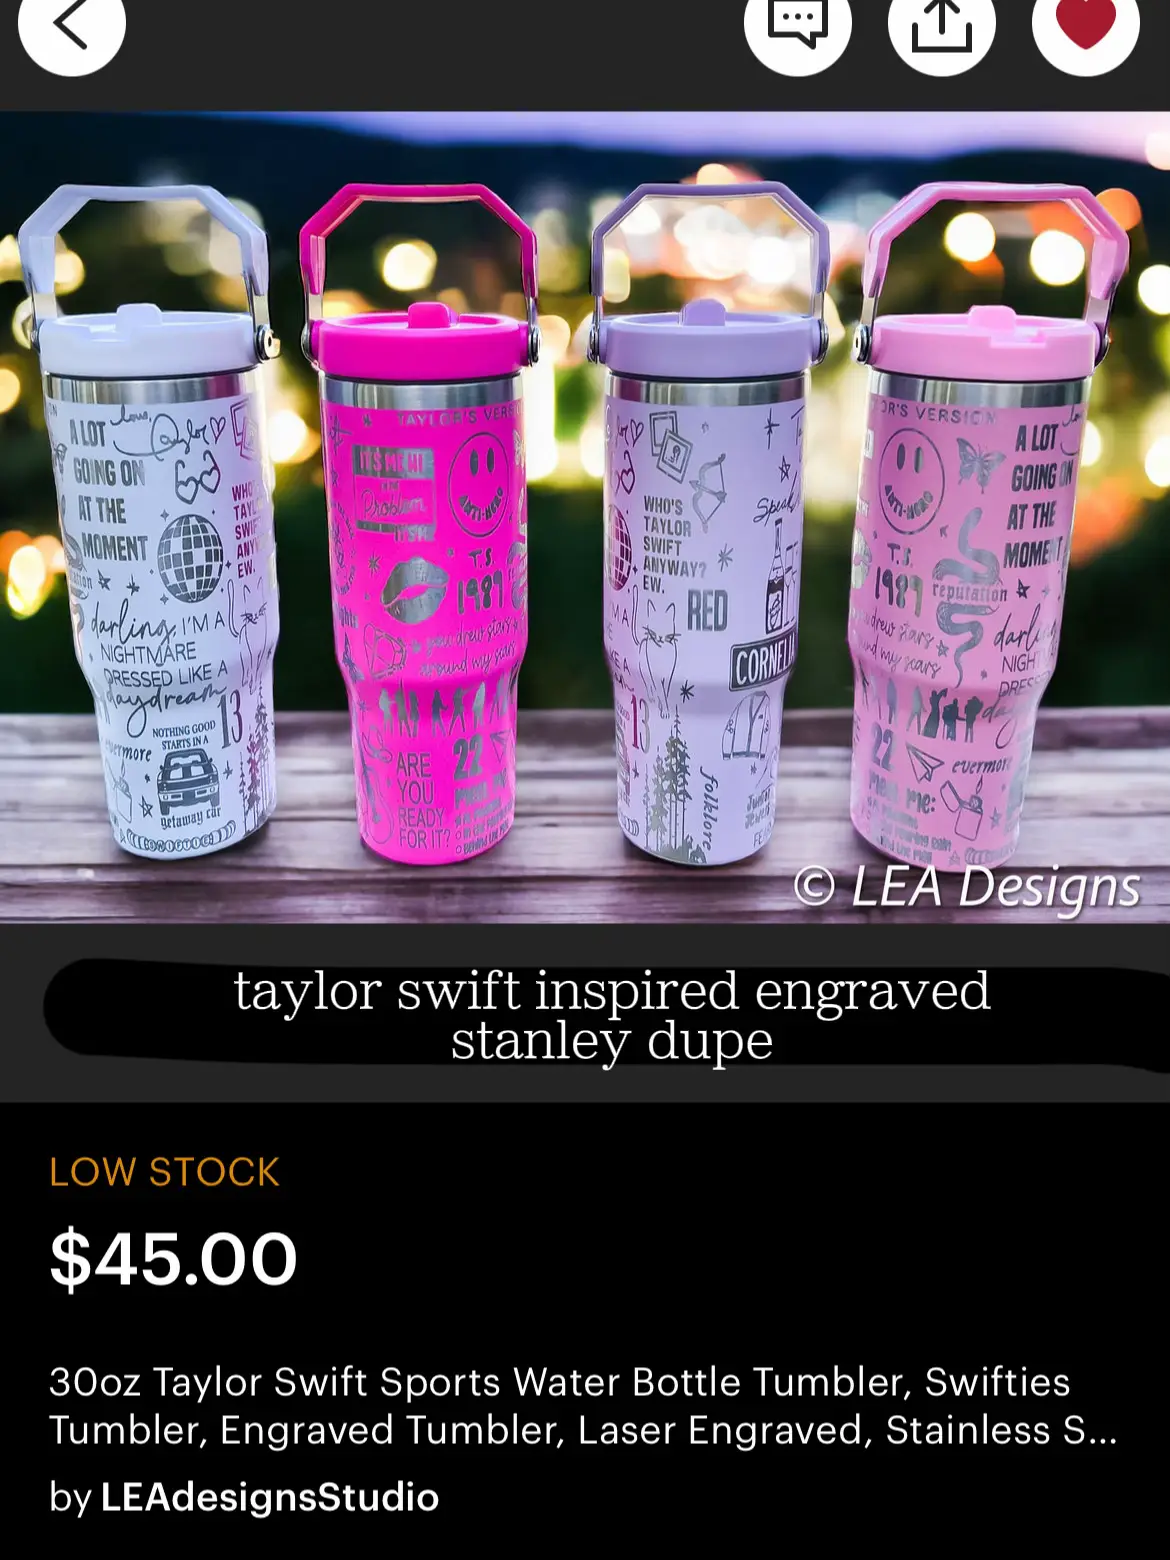 water bottle stickers with Taylor Swift - Lemon8 Search